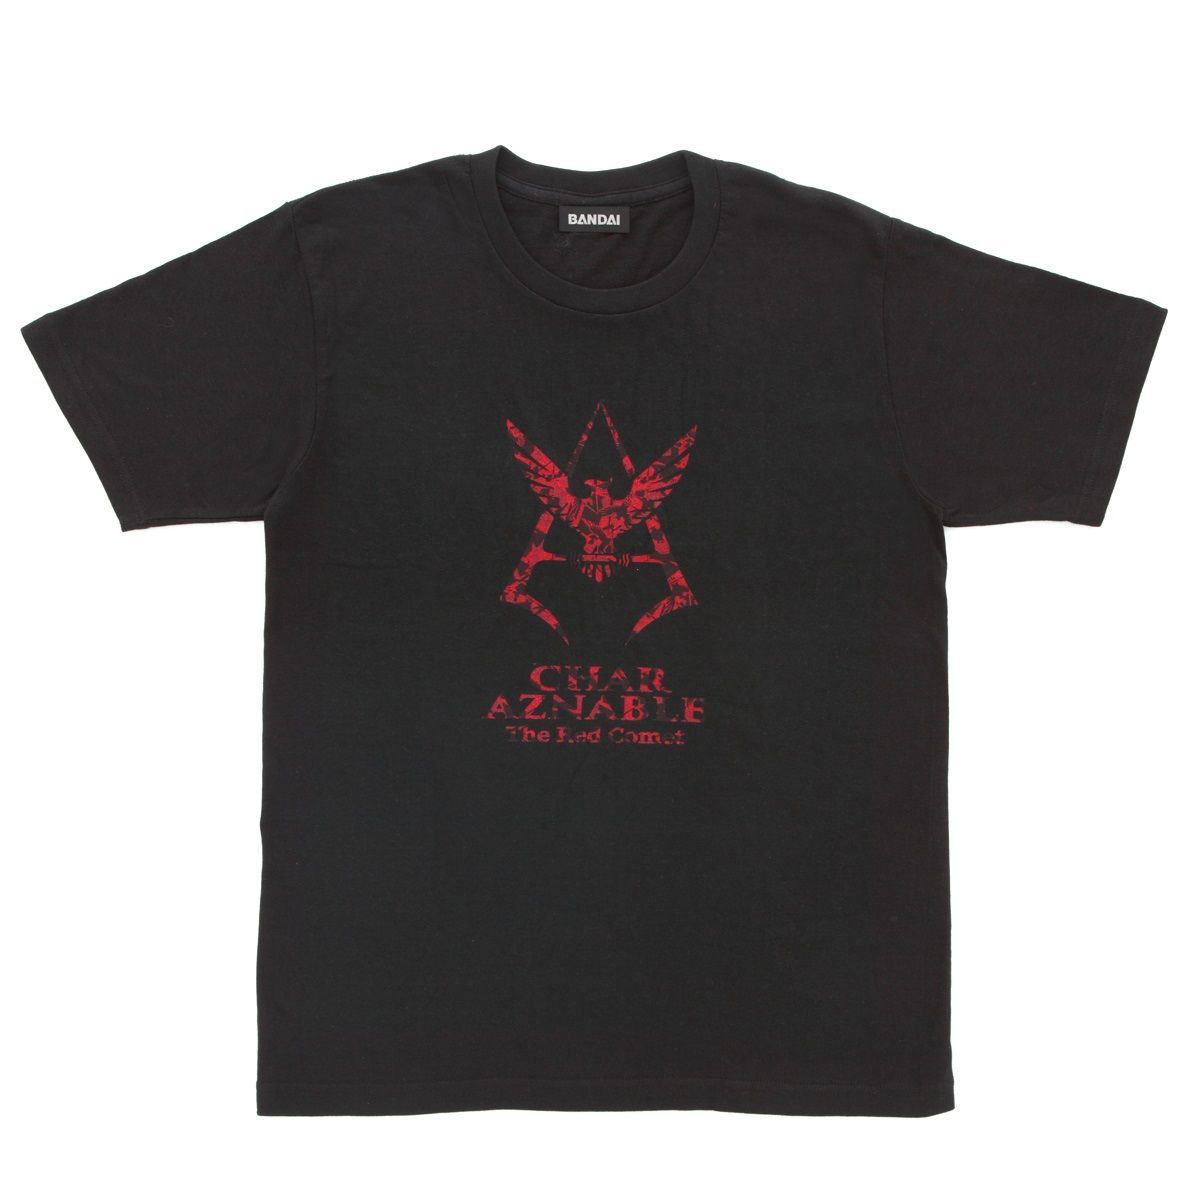 Mobile Suit Gundam Camouflage Pattern Char Aznable Emblem T-shirt [May 2021 Delivery]